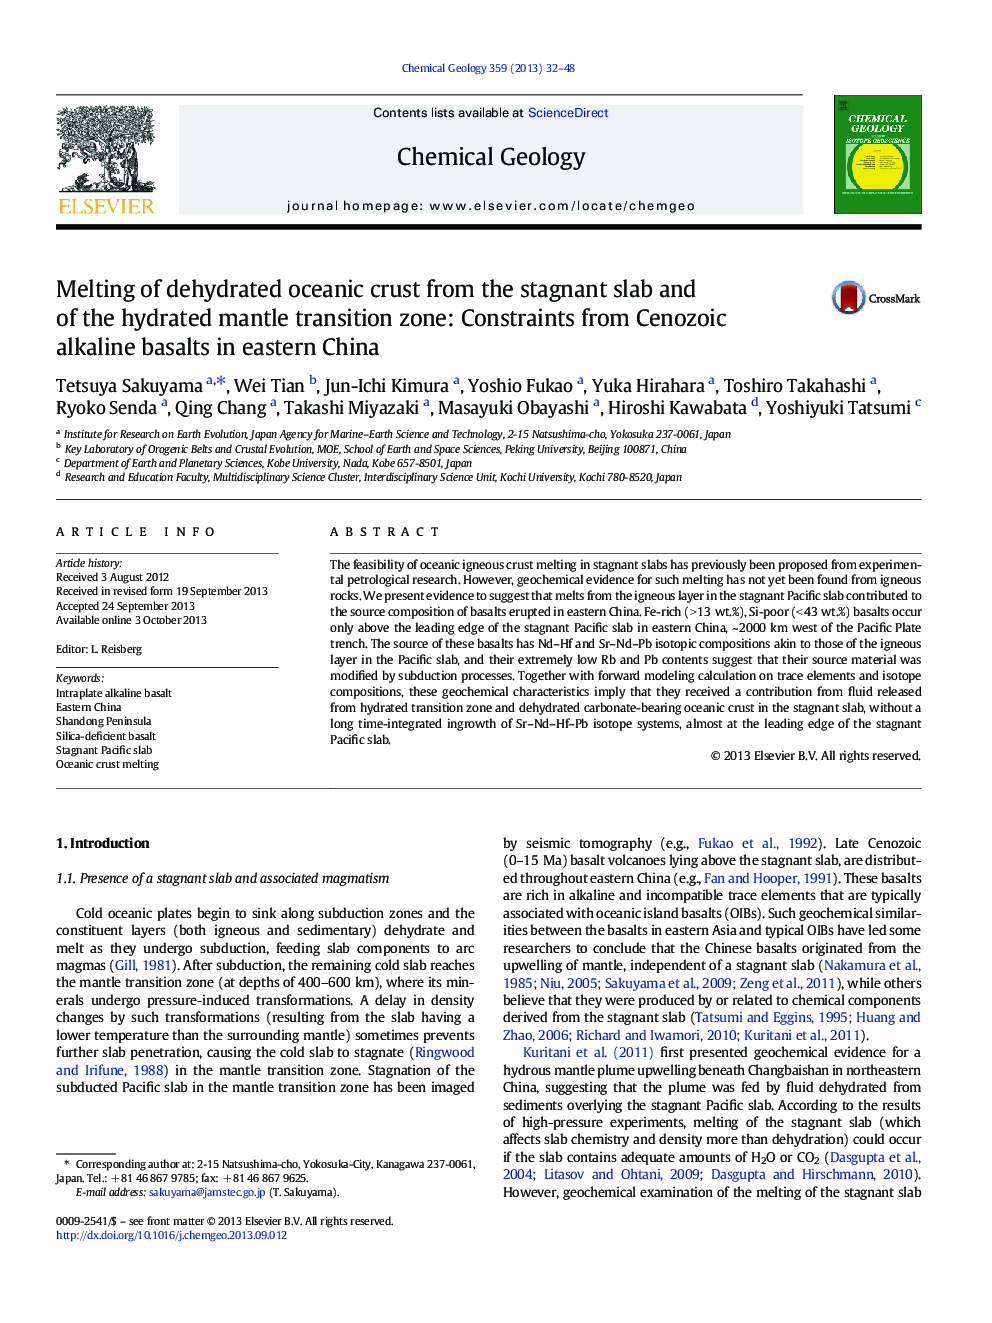 Melting of dehydrated oceanic crust from the stagnant slab and of the hydrated mantle transition zone: Constraints from Cenozoic alkaline basalts in eastern China